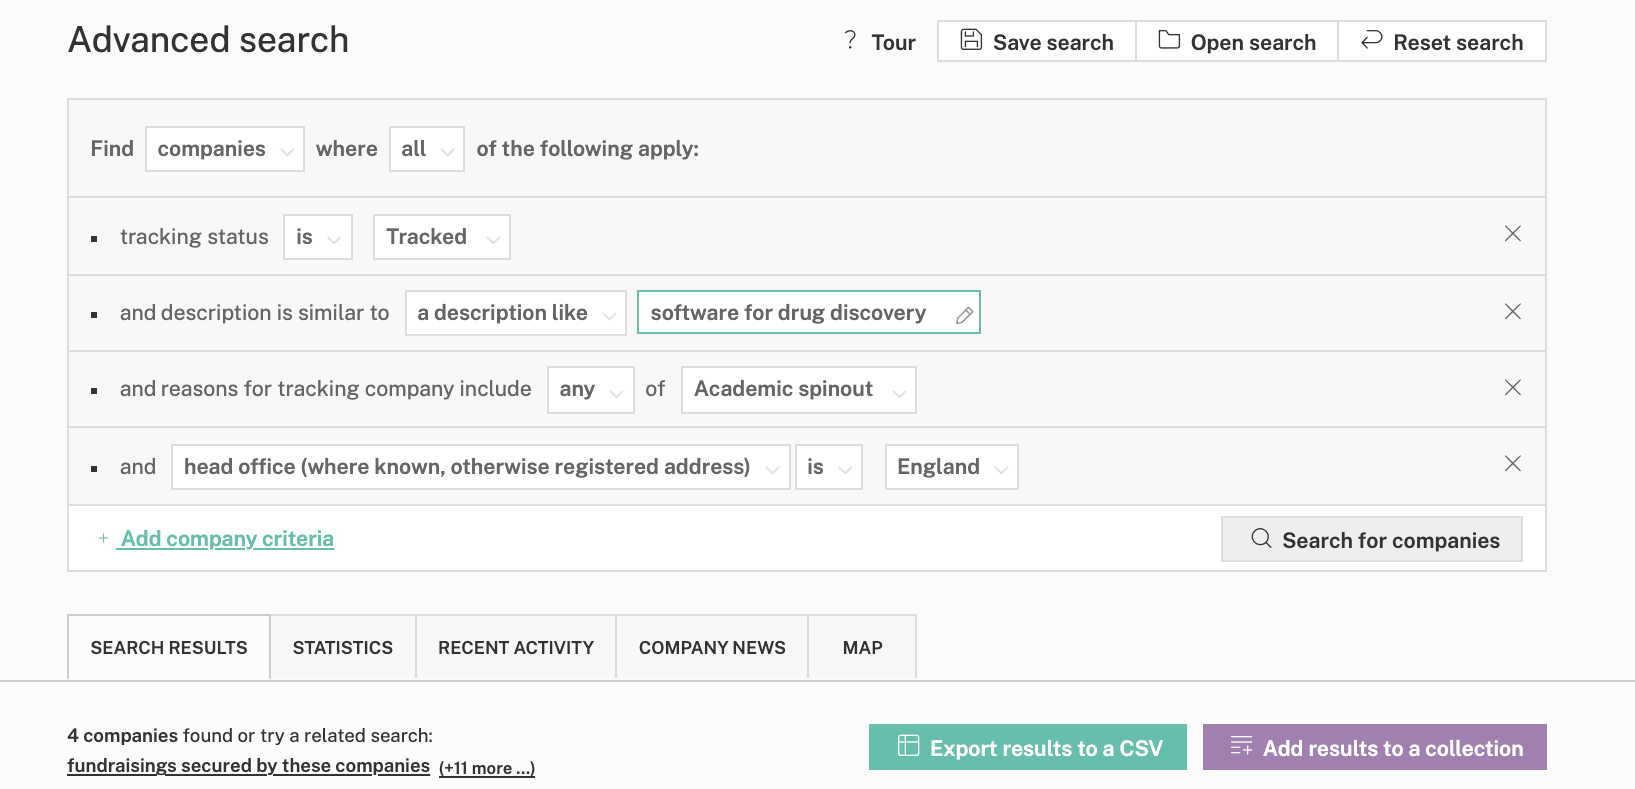 Advanced Search filters on the Beauhurst platform: similar description to "software for drug discovery" and academic spinout in England